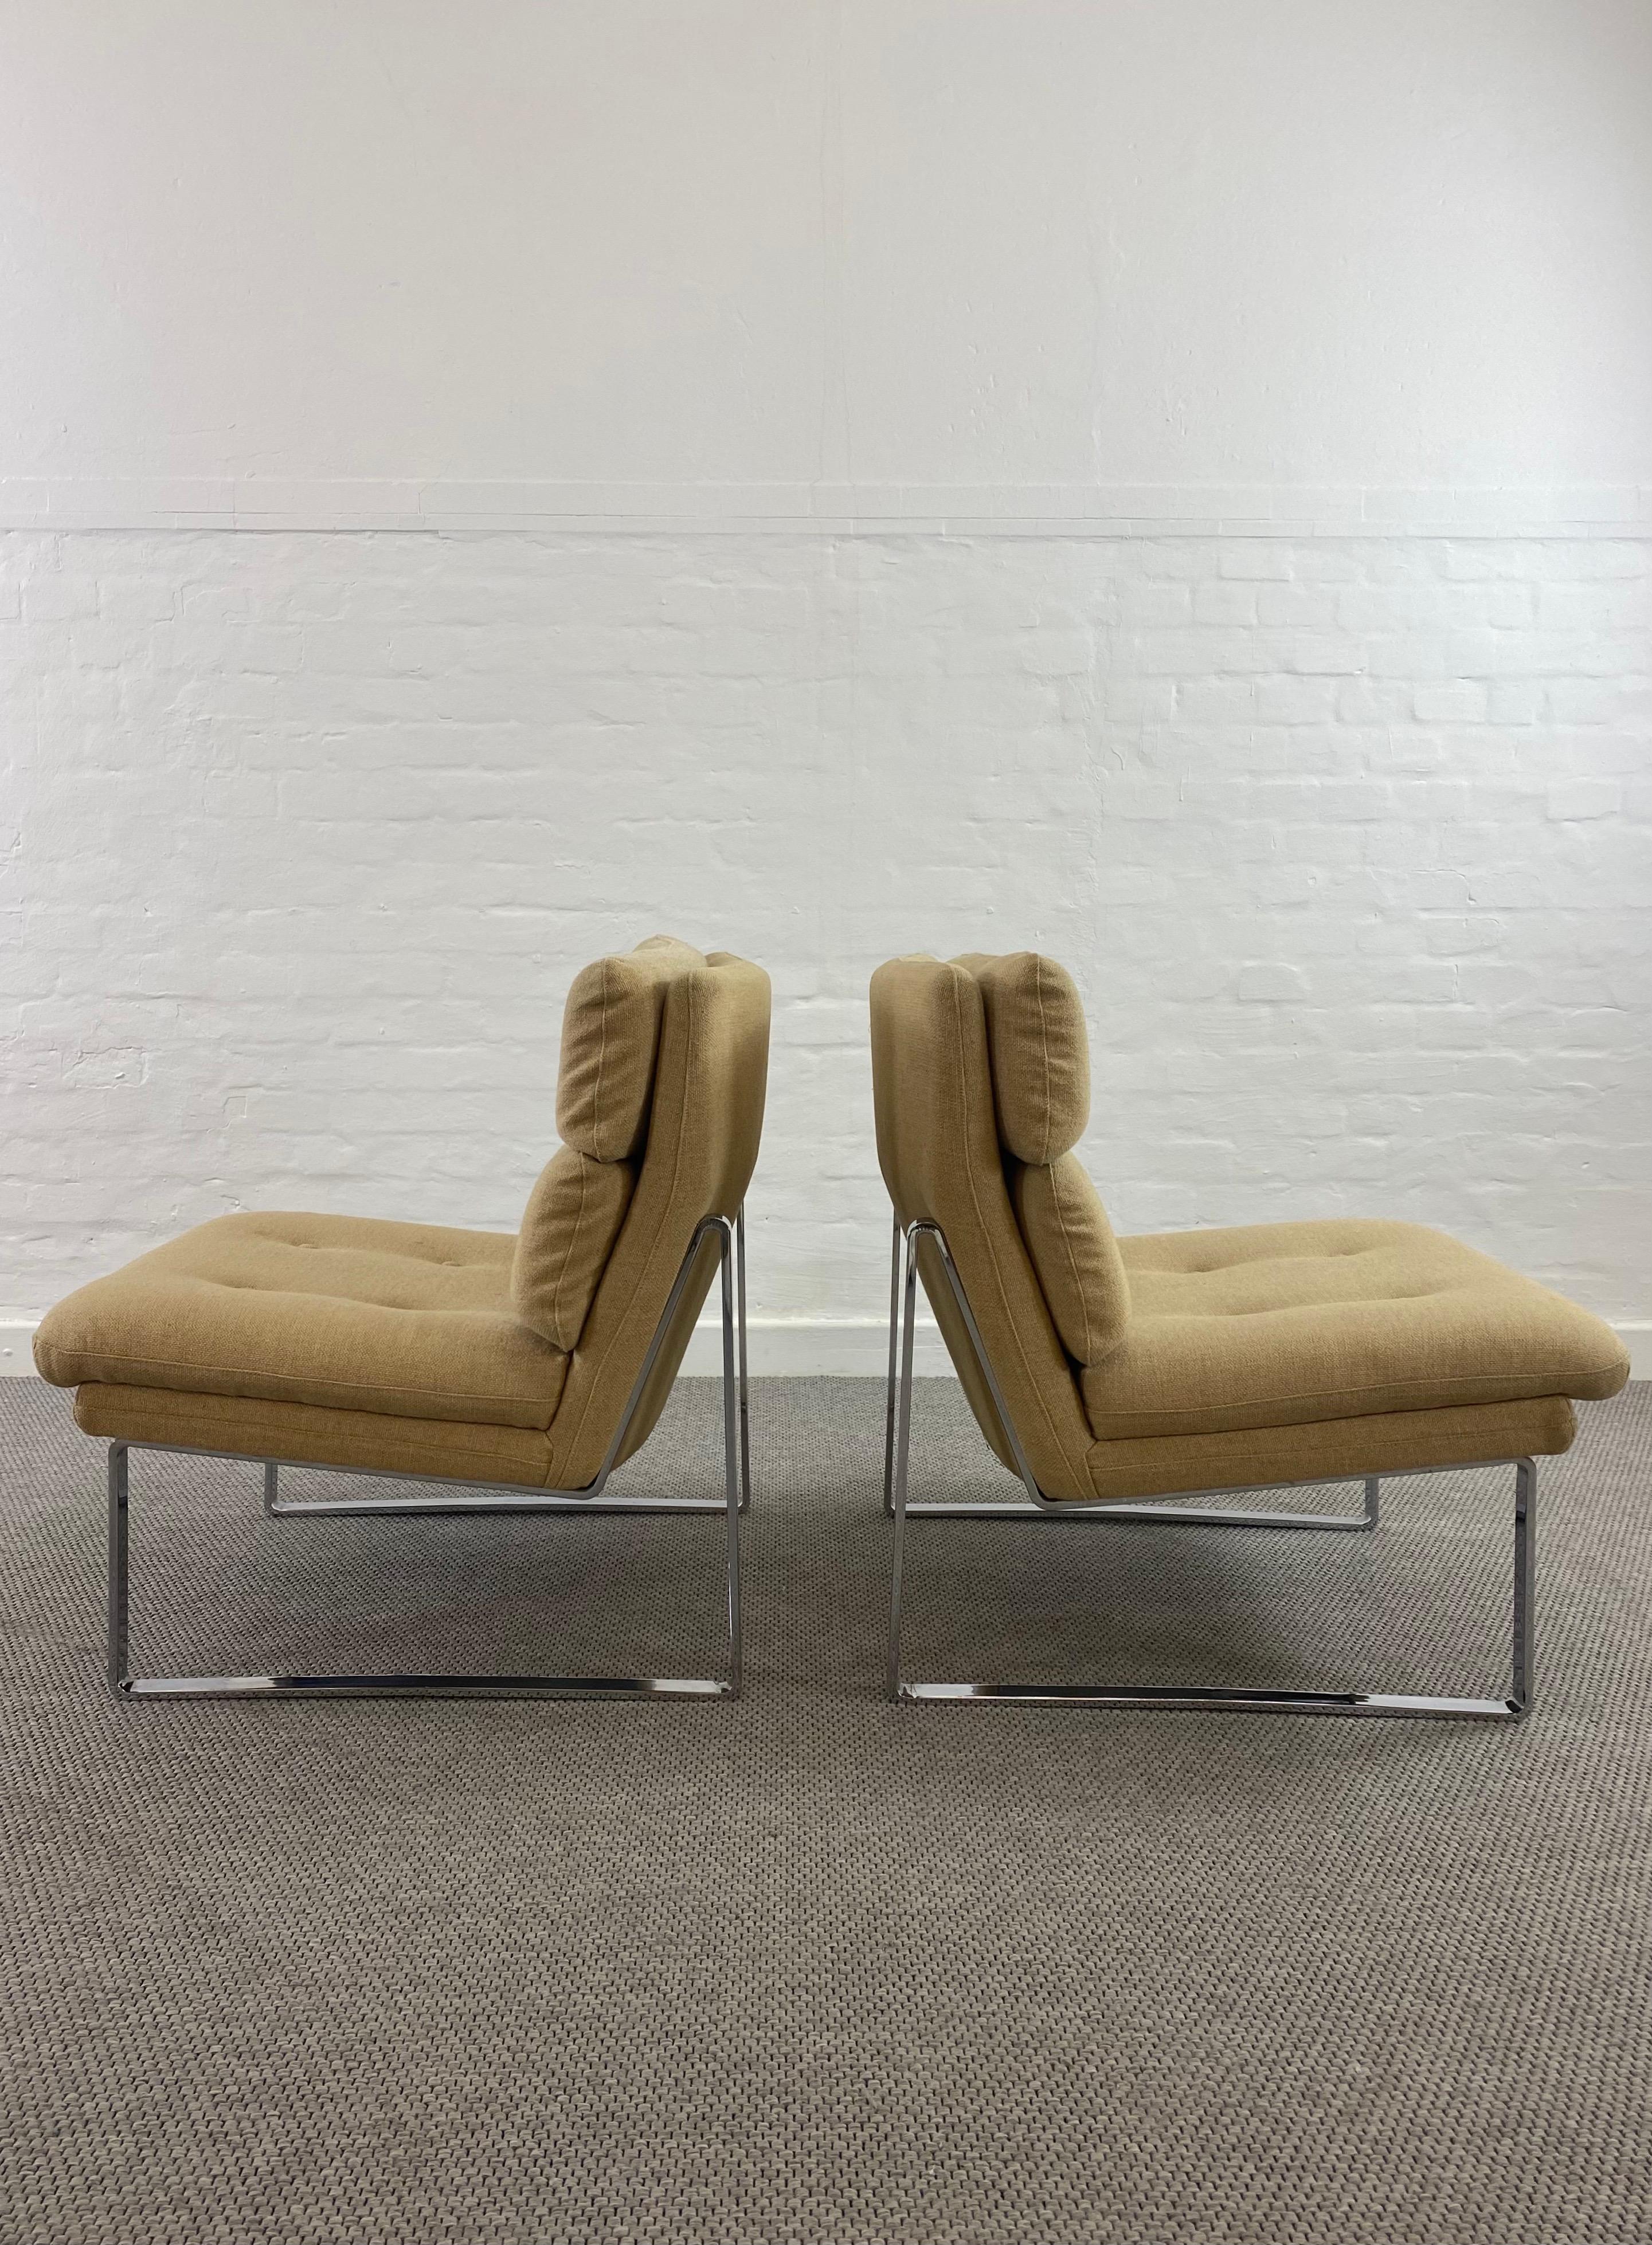 Pair of Midcentury Steel Cocktail Chair from Miller Borgsen by Röder & Söhne 3